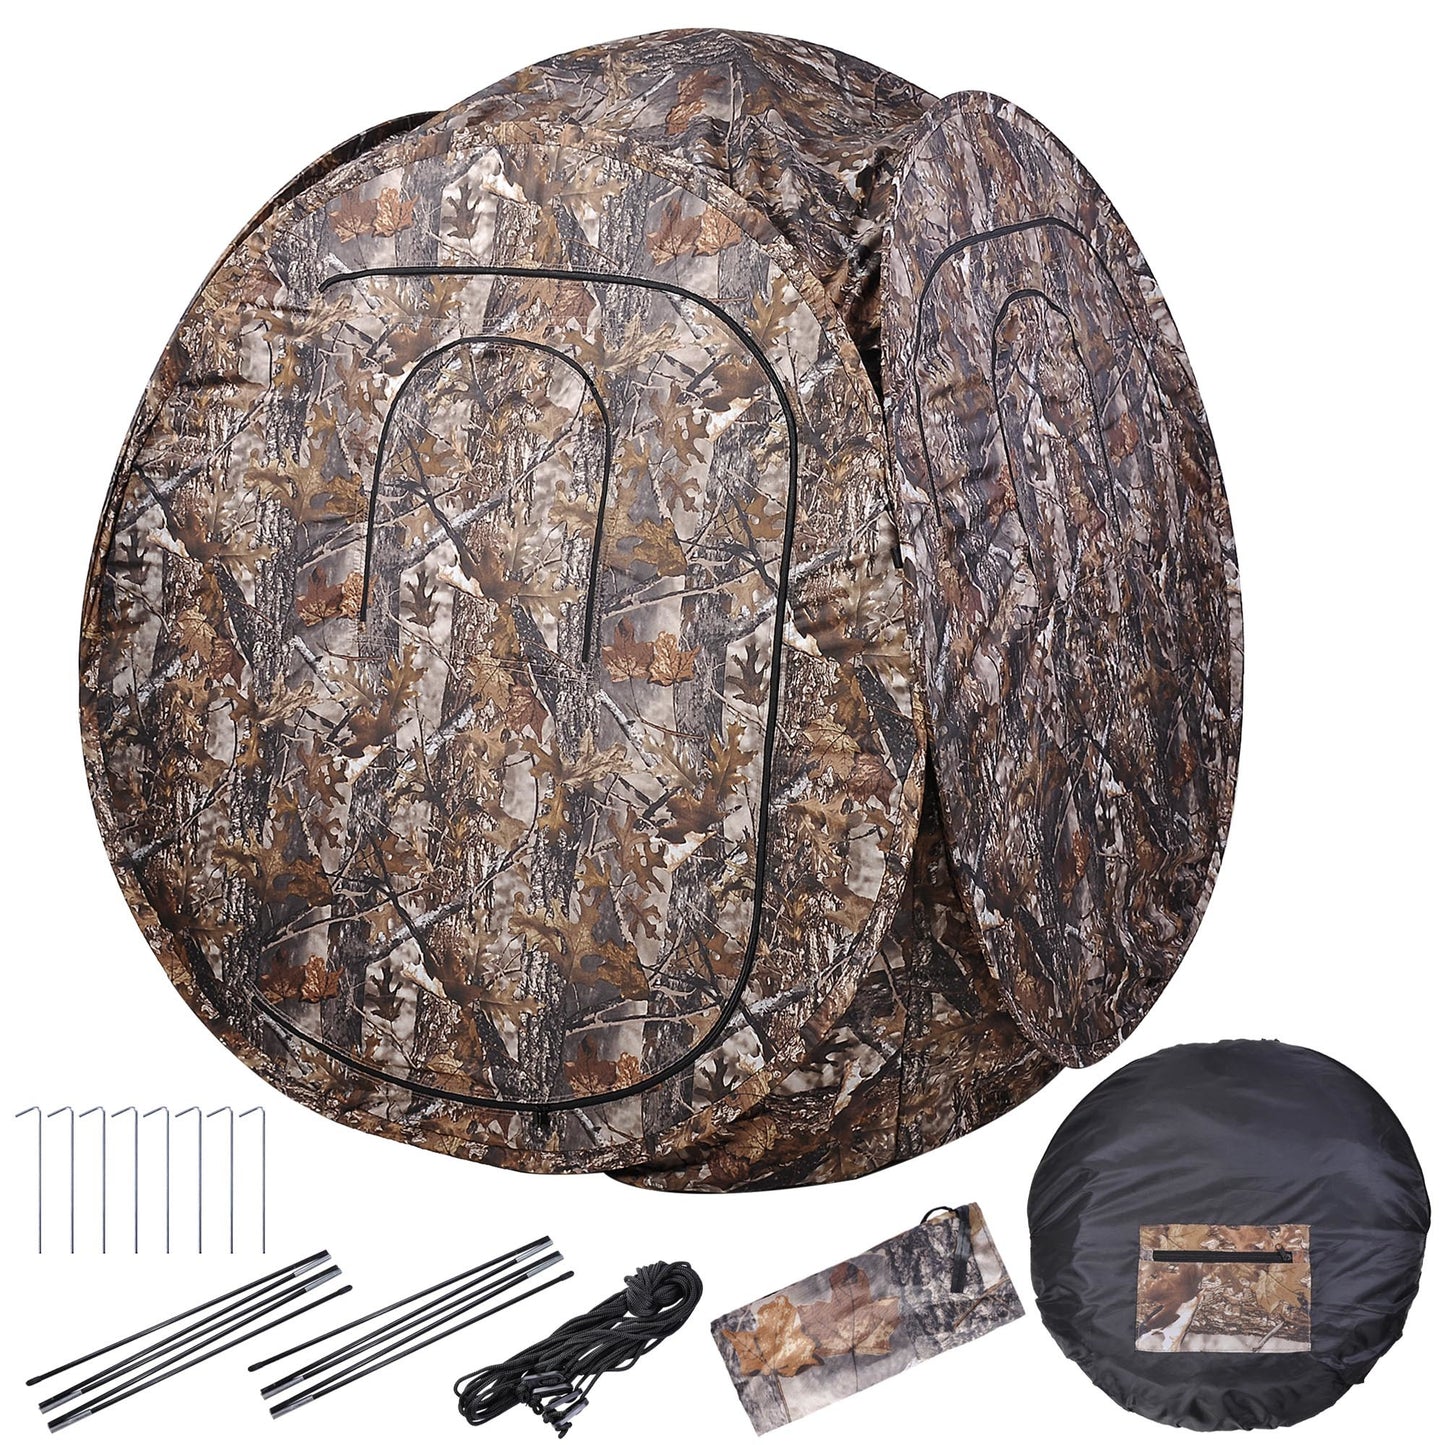 Portable & Collapsible Two-Person Hunting Blind Tent